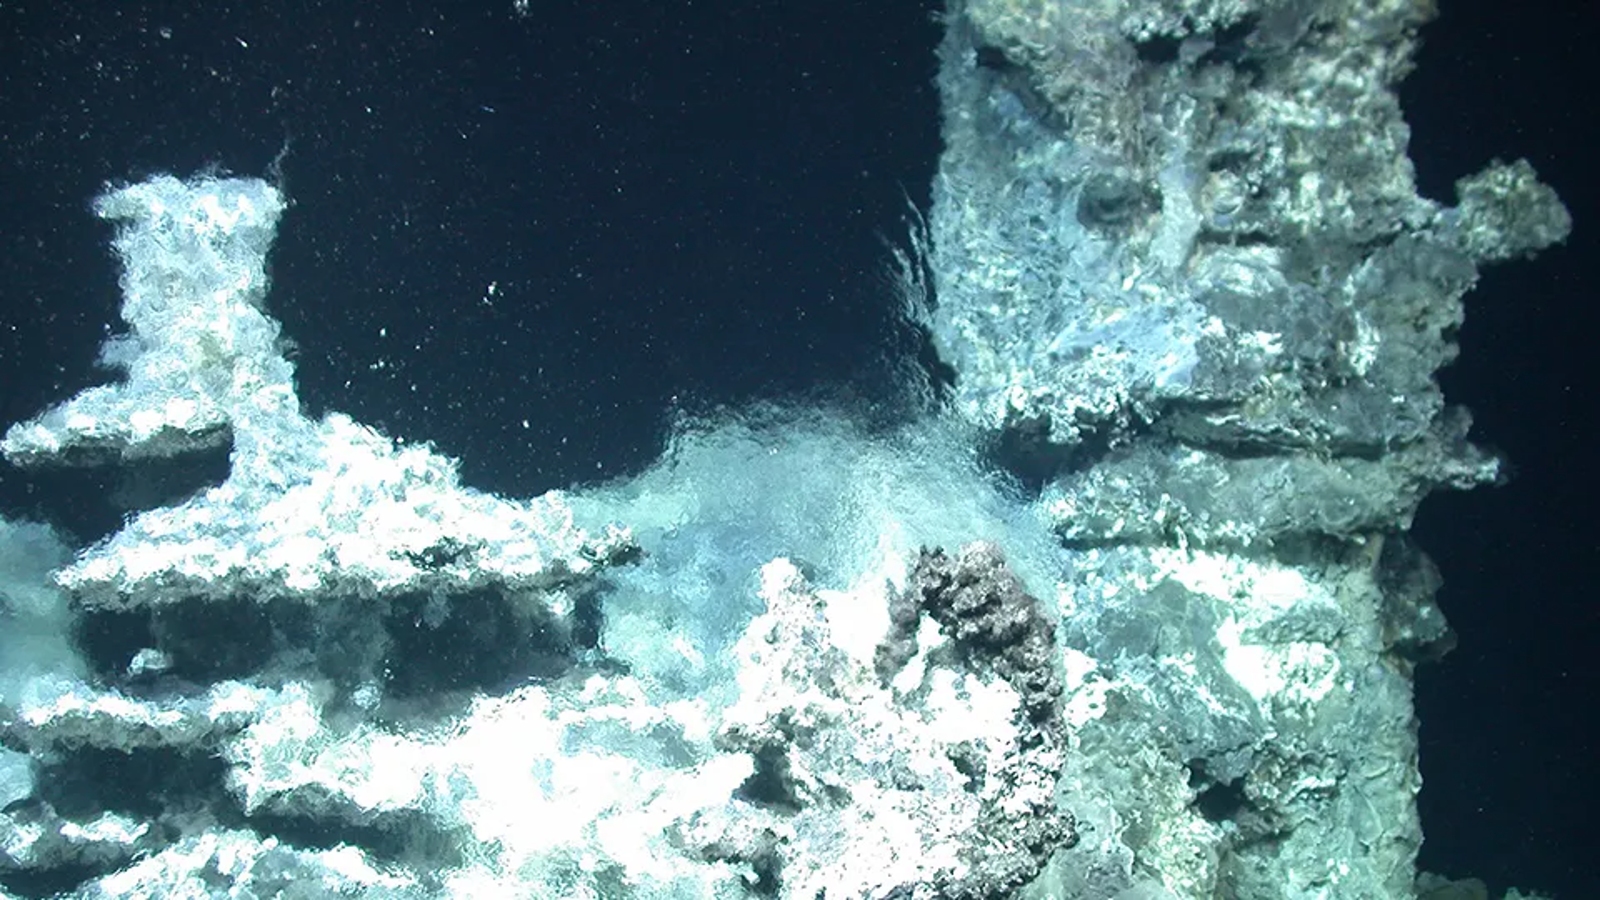  'Dragon' and 'tree of life' hydrothermal vents discovered in Arctic region scientists thought was geologically dead 